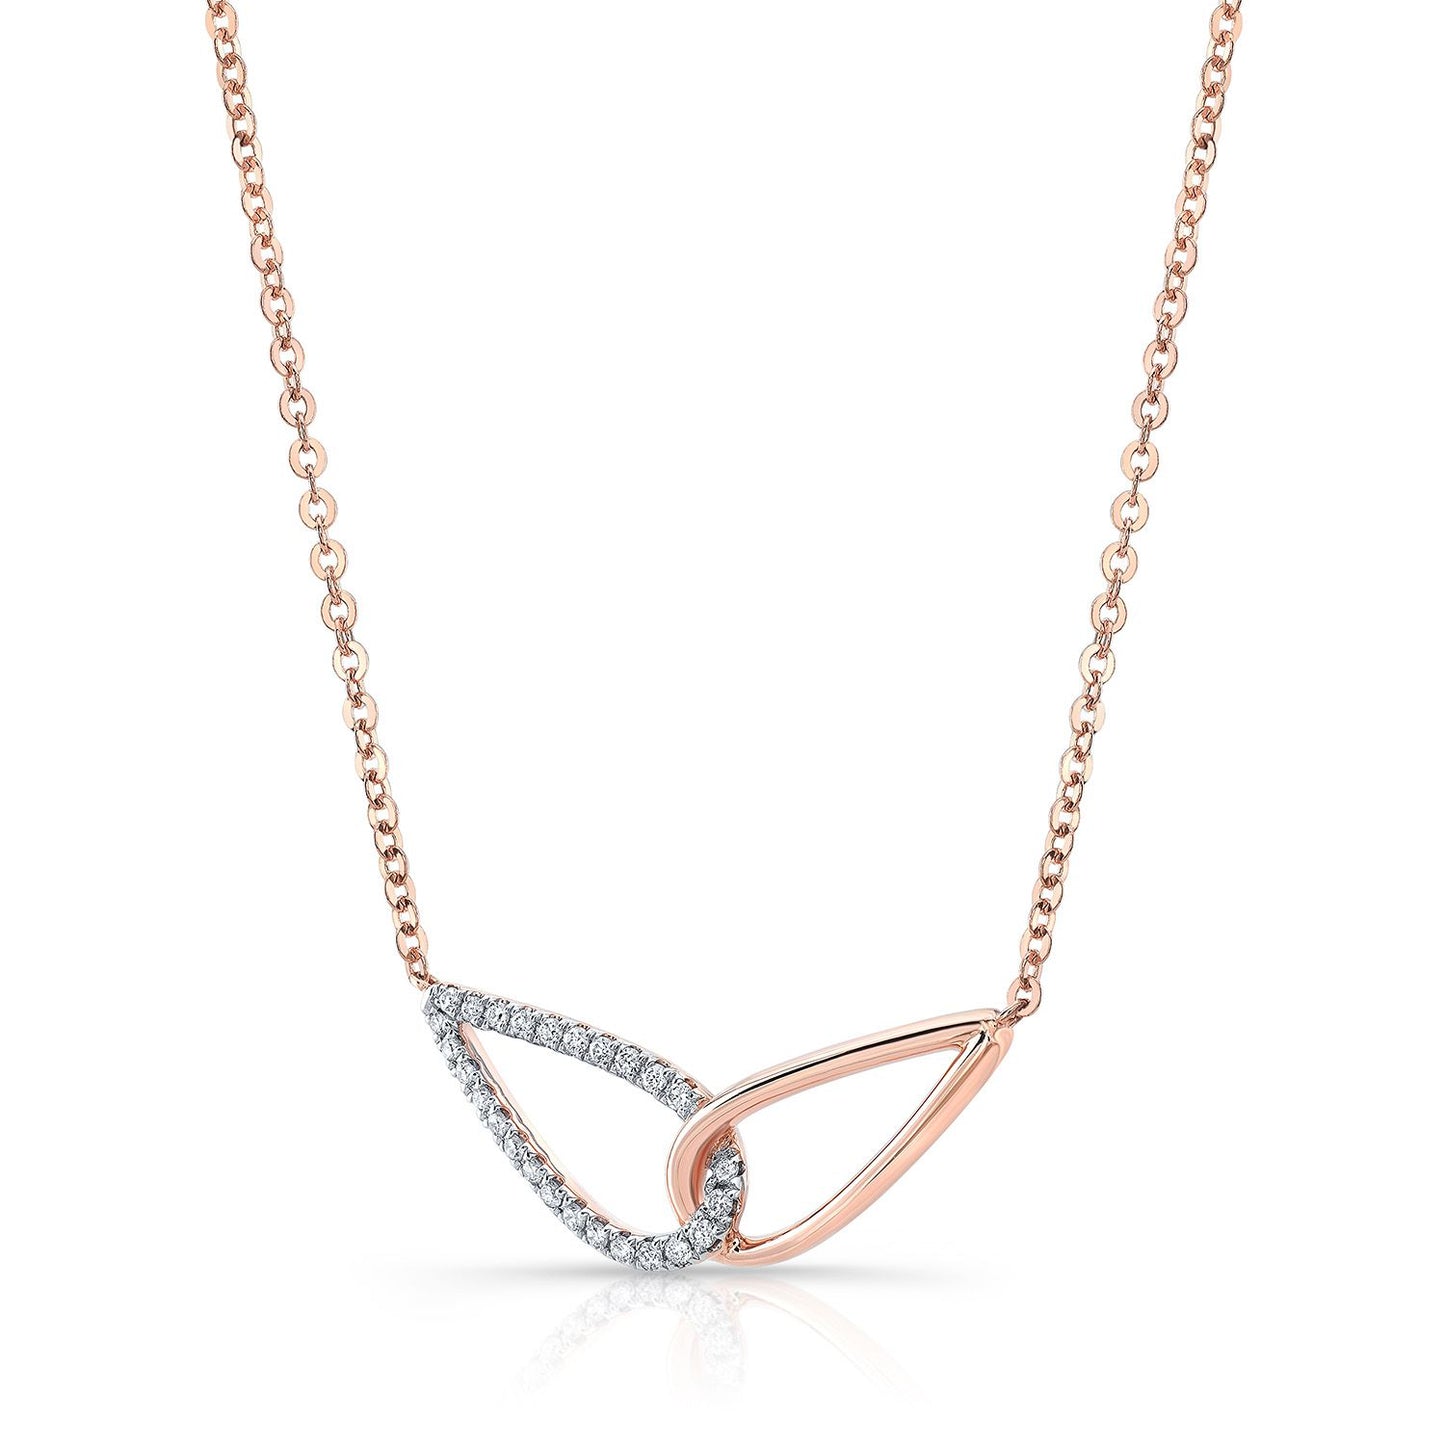 Diamond Pave And High Polish Teardrop Interlink Necklace In 14k Rose Gold, 16-18 Inch